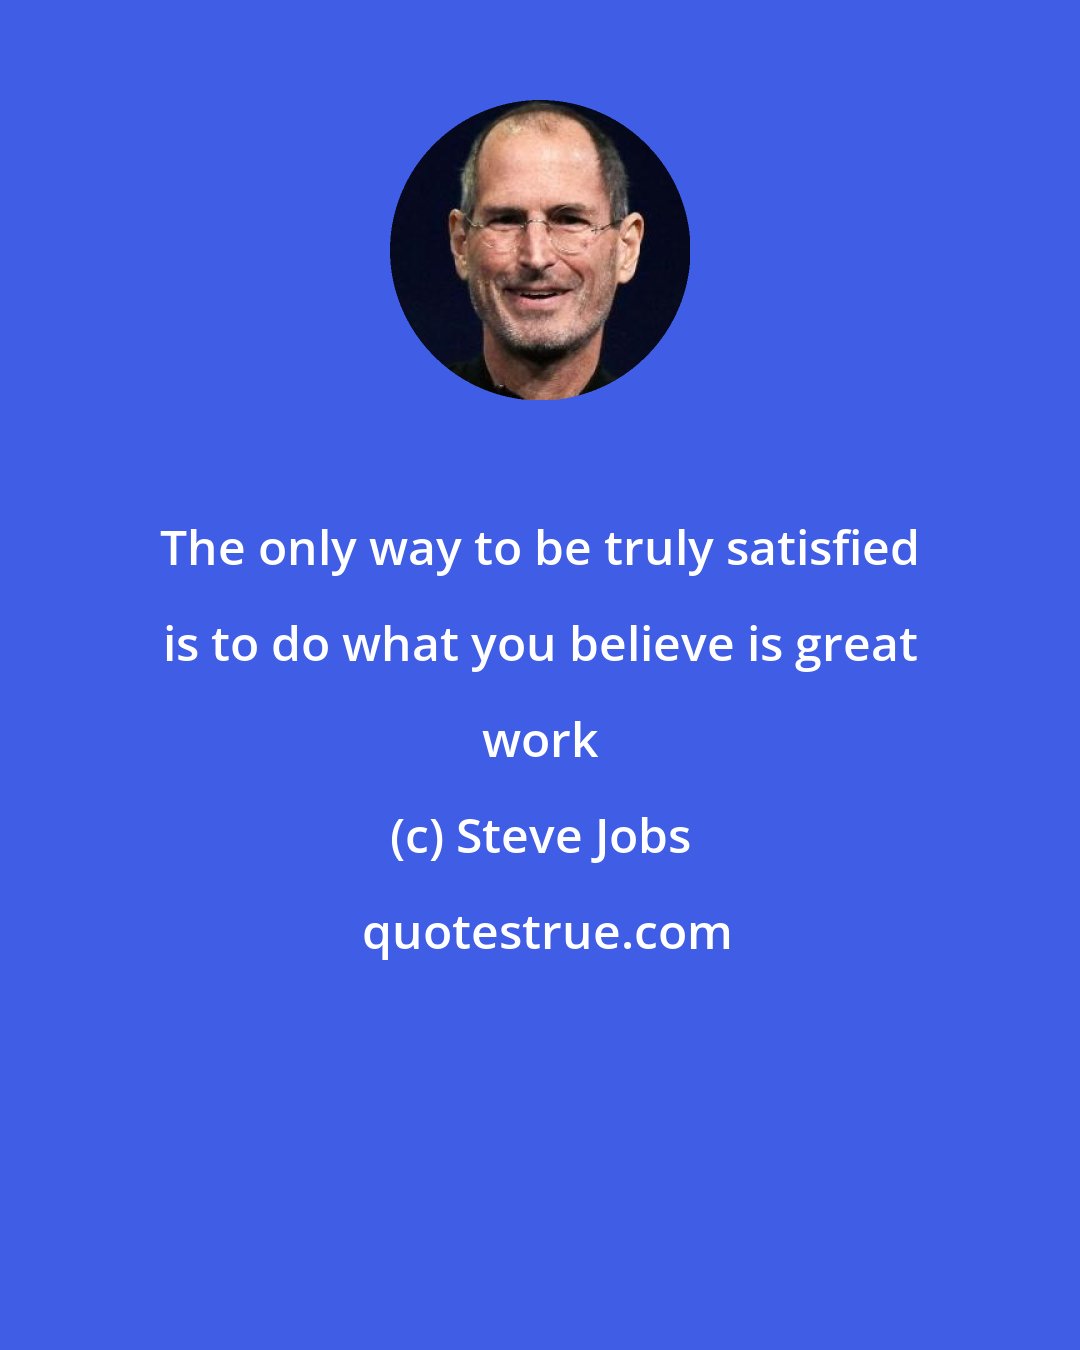 Steve Jobs: The only way to be truly satisfied is to do what you believe is great work